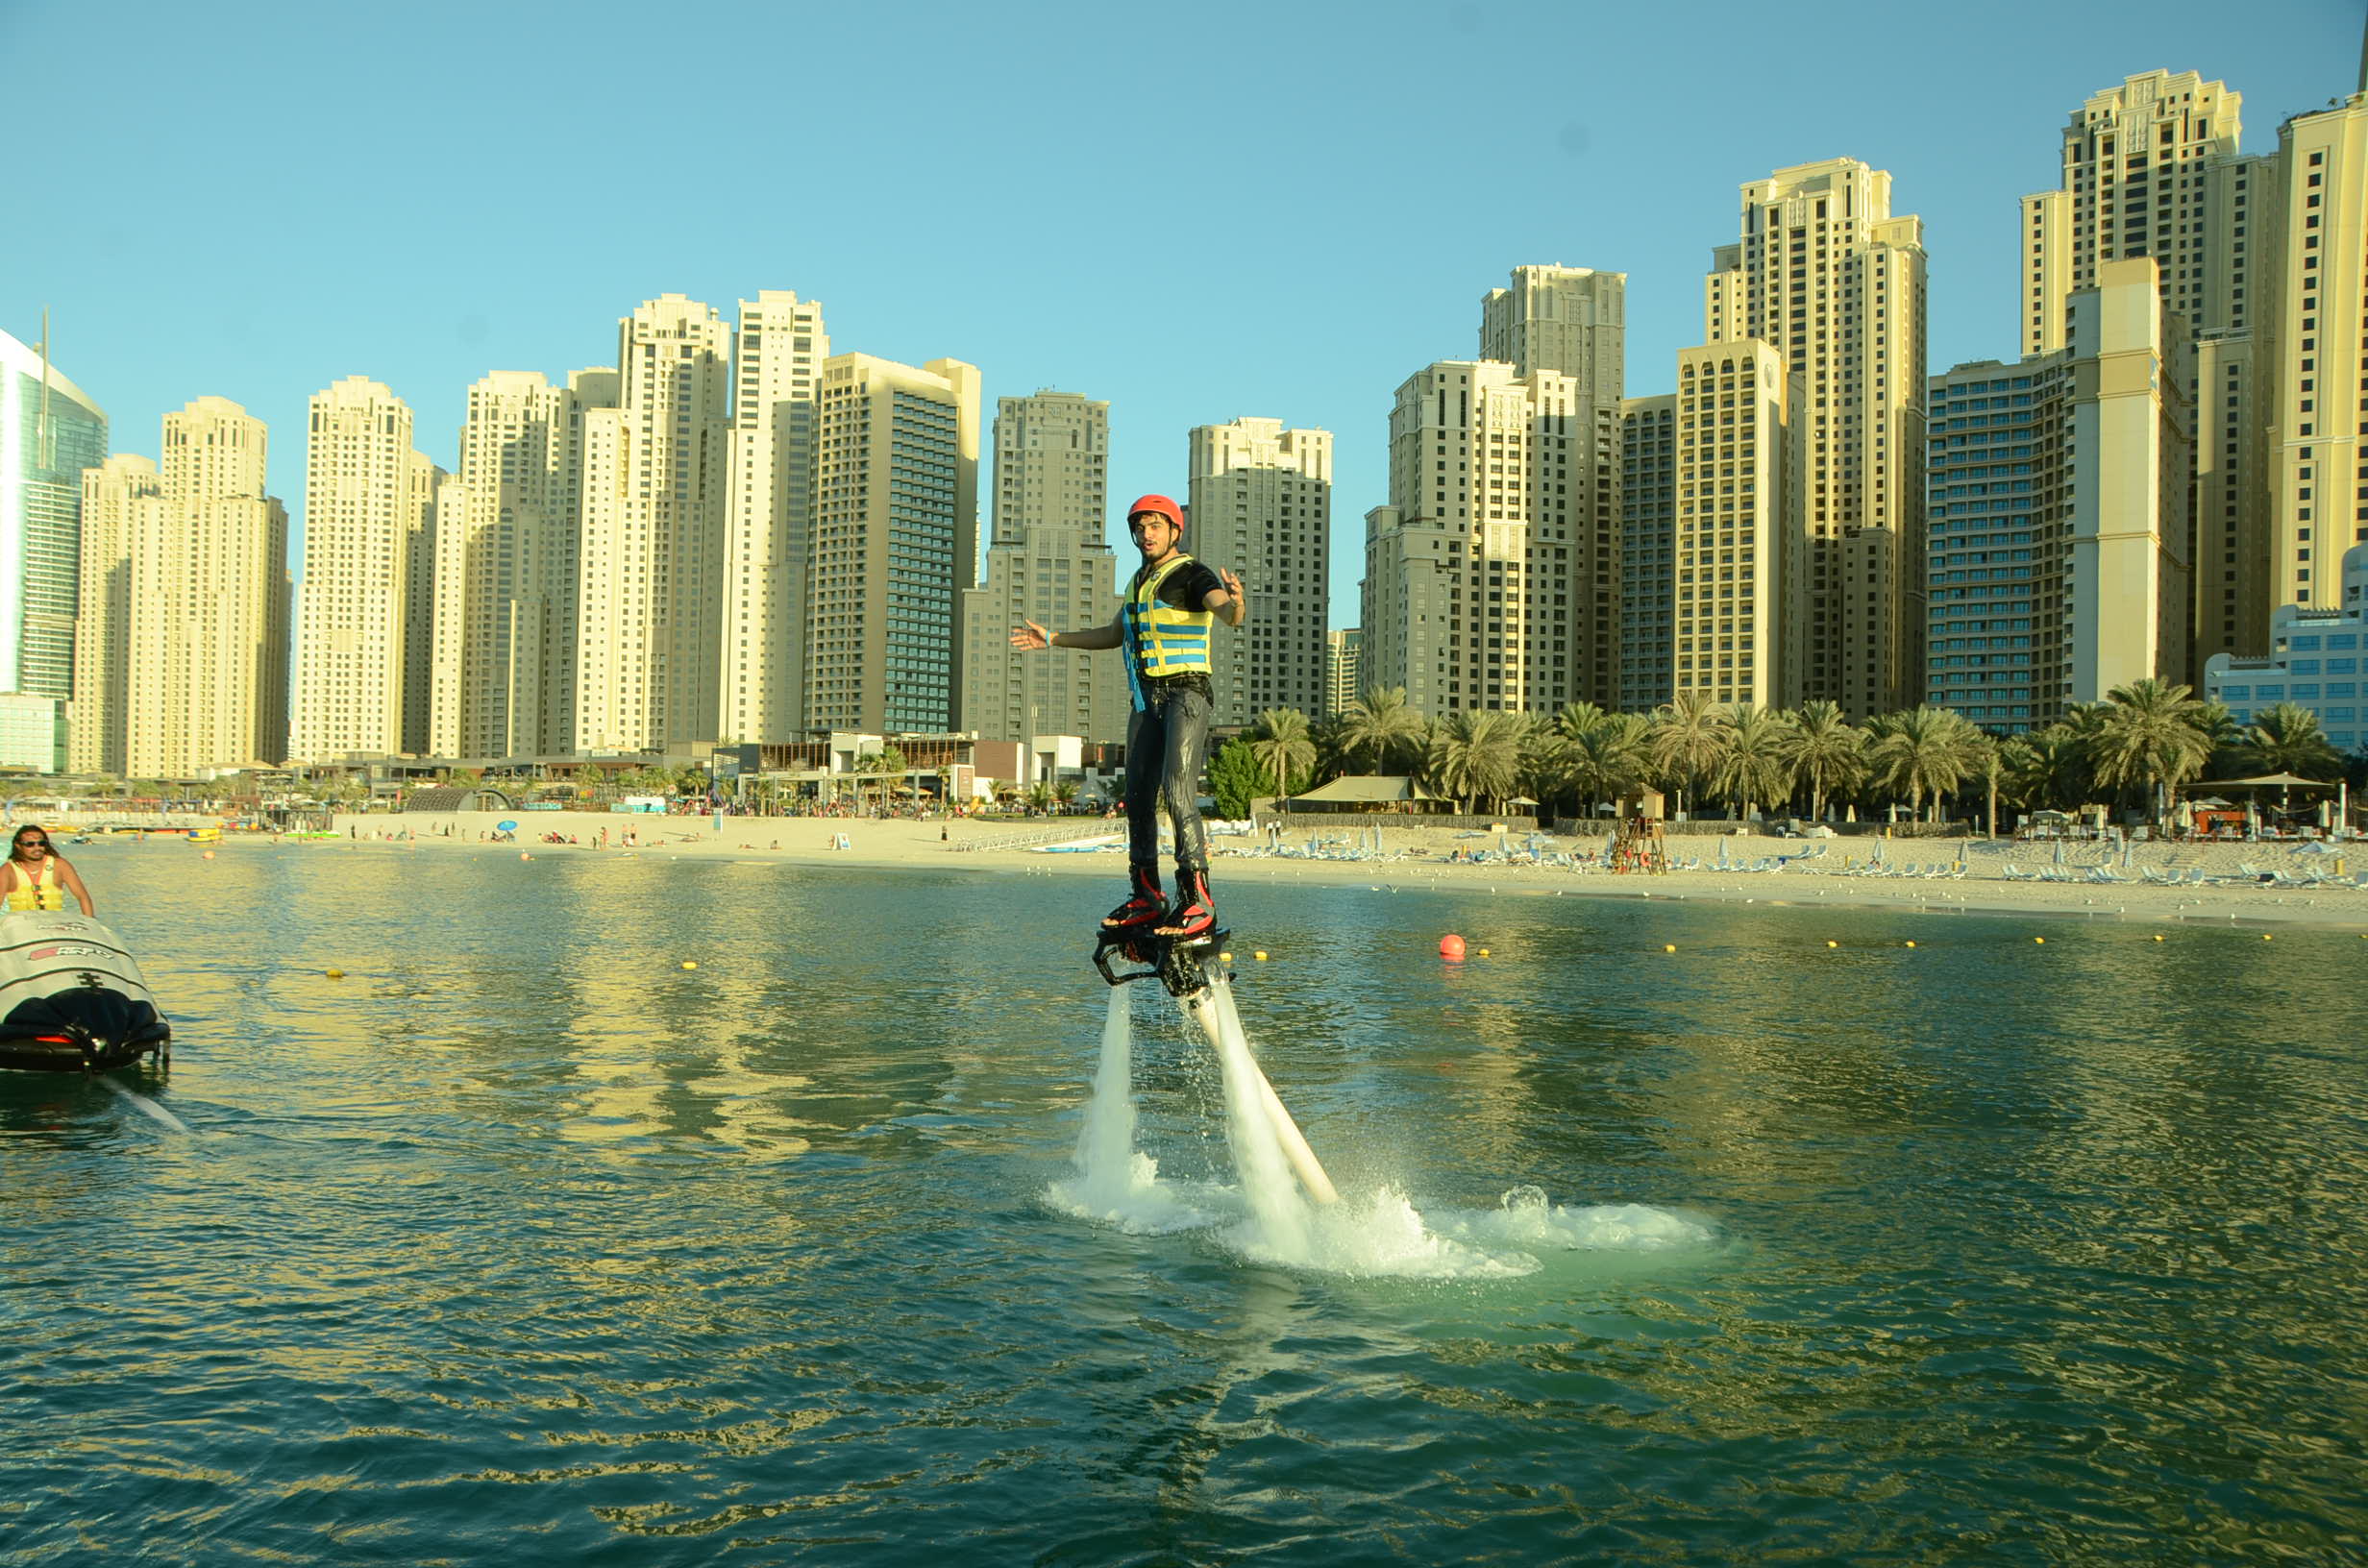 I was pretty good at Flyboarding for a first timer!